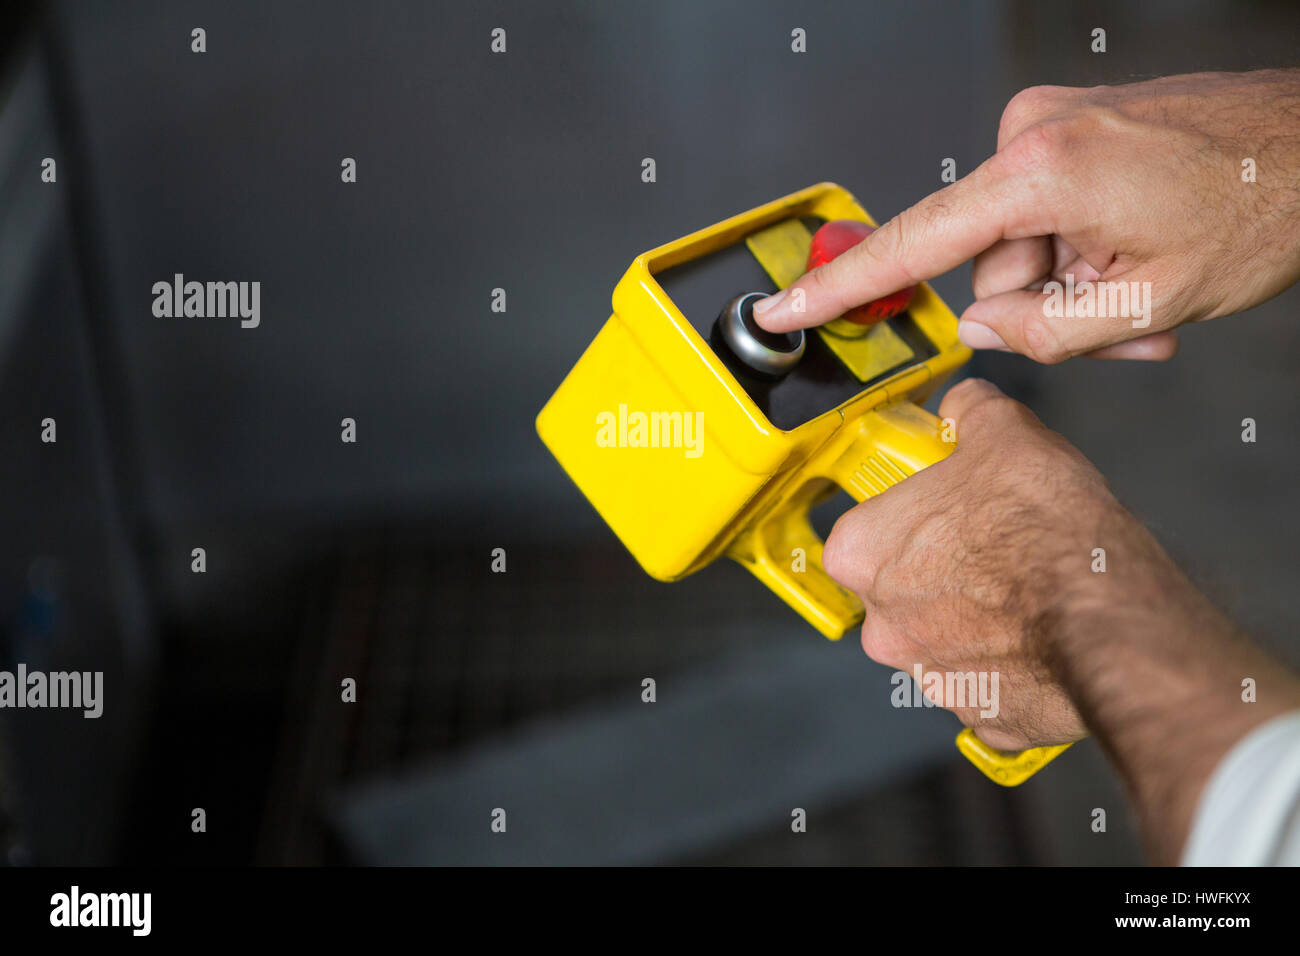 Cropped hands of male worker using yellow tool in factory Stock Photo